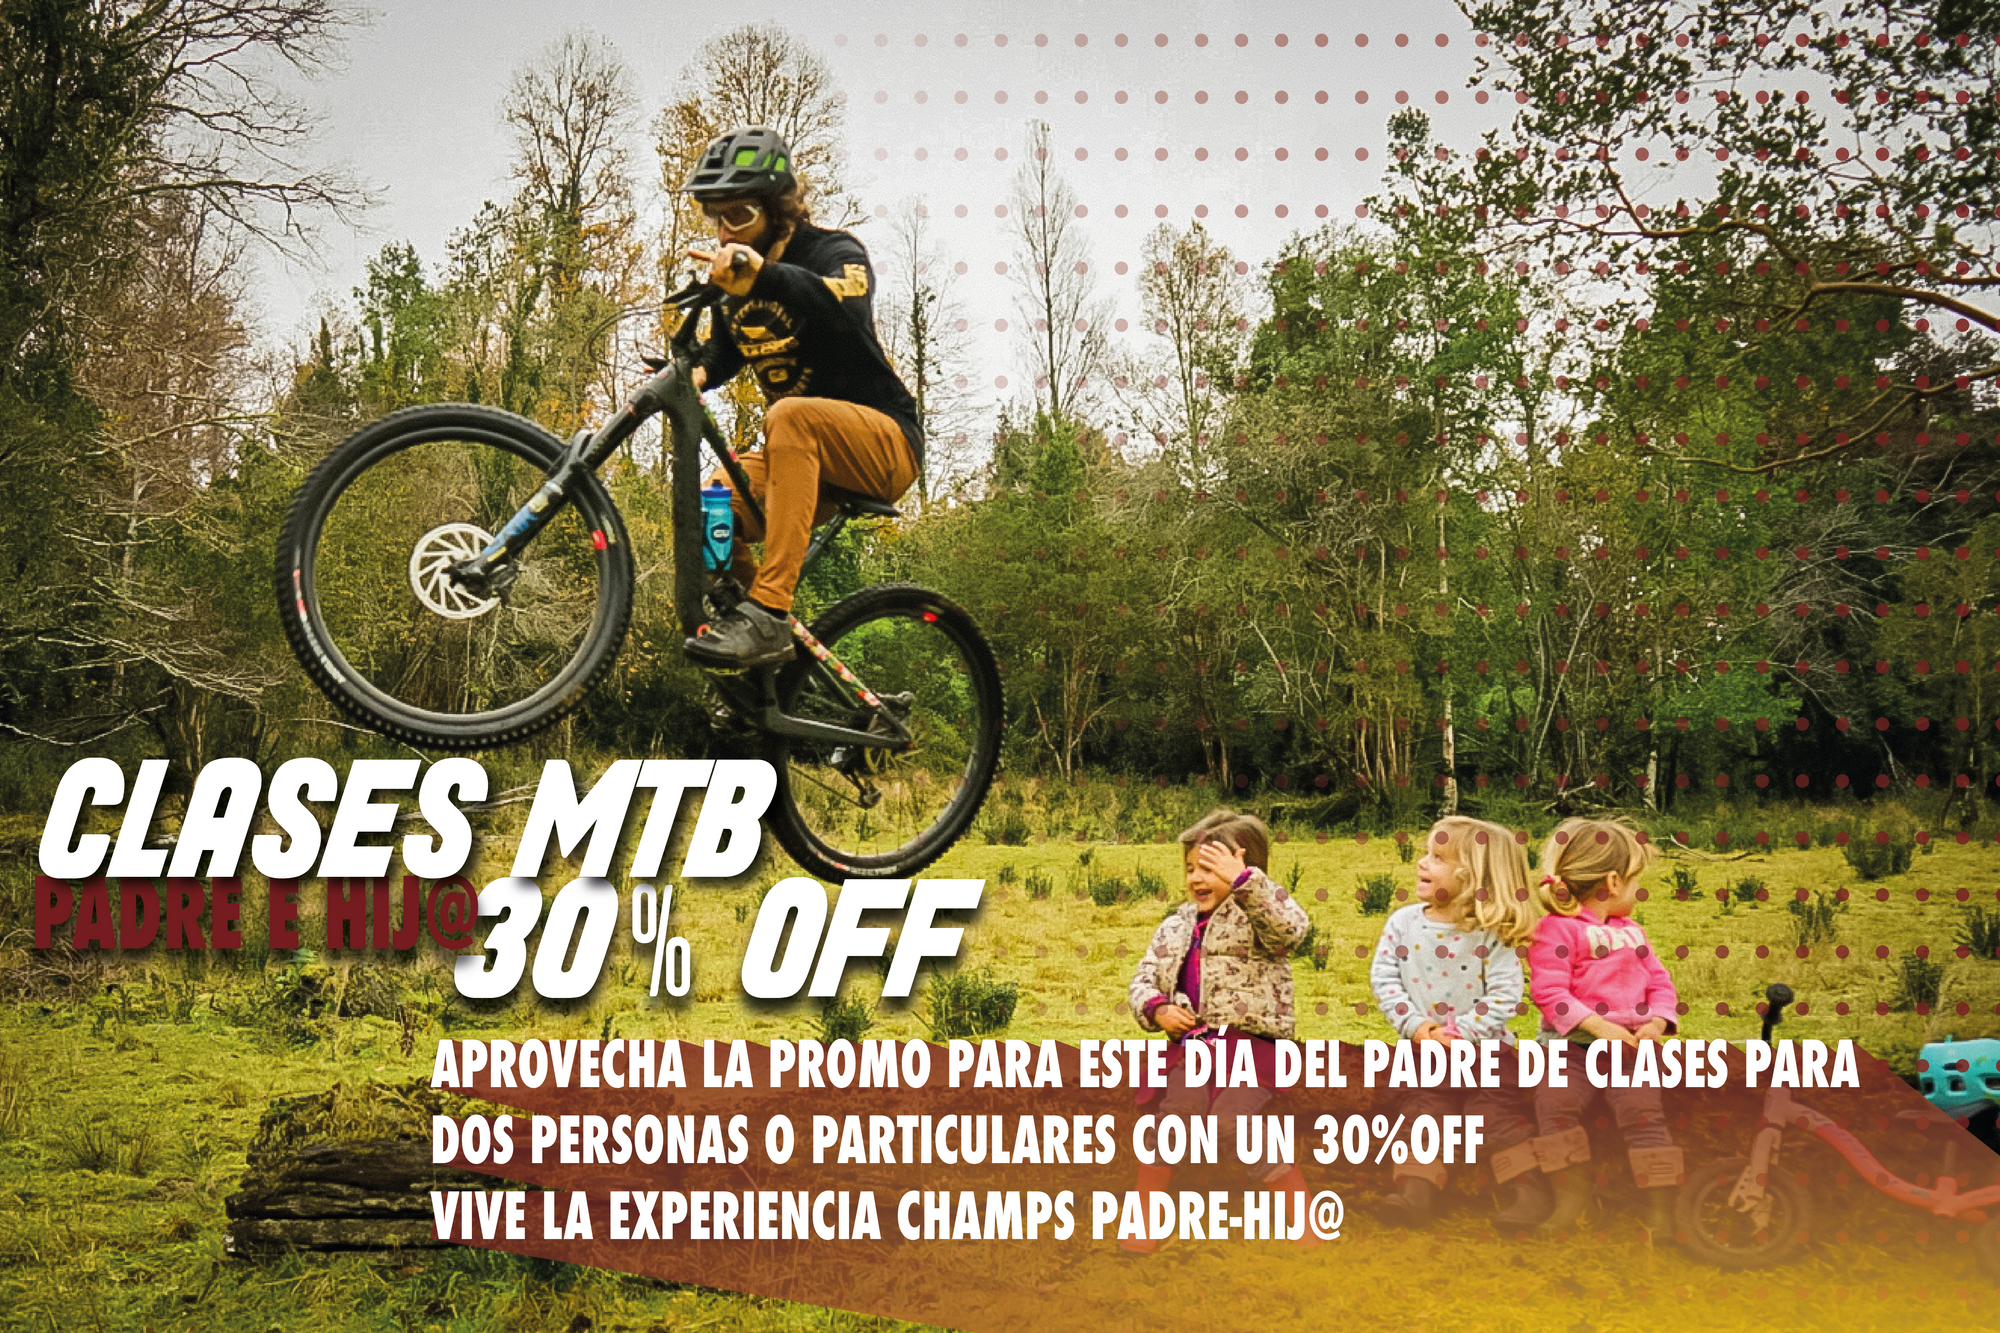 Clases MTB Padre - Hij@ // Champs GIFT CARD